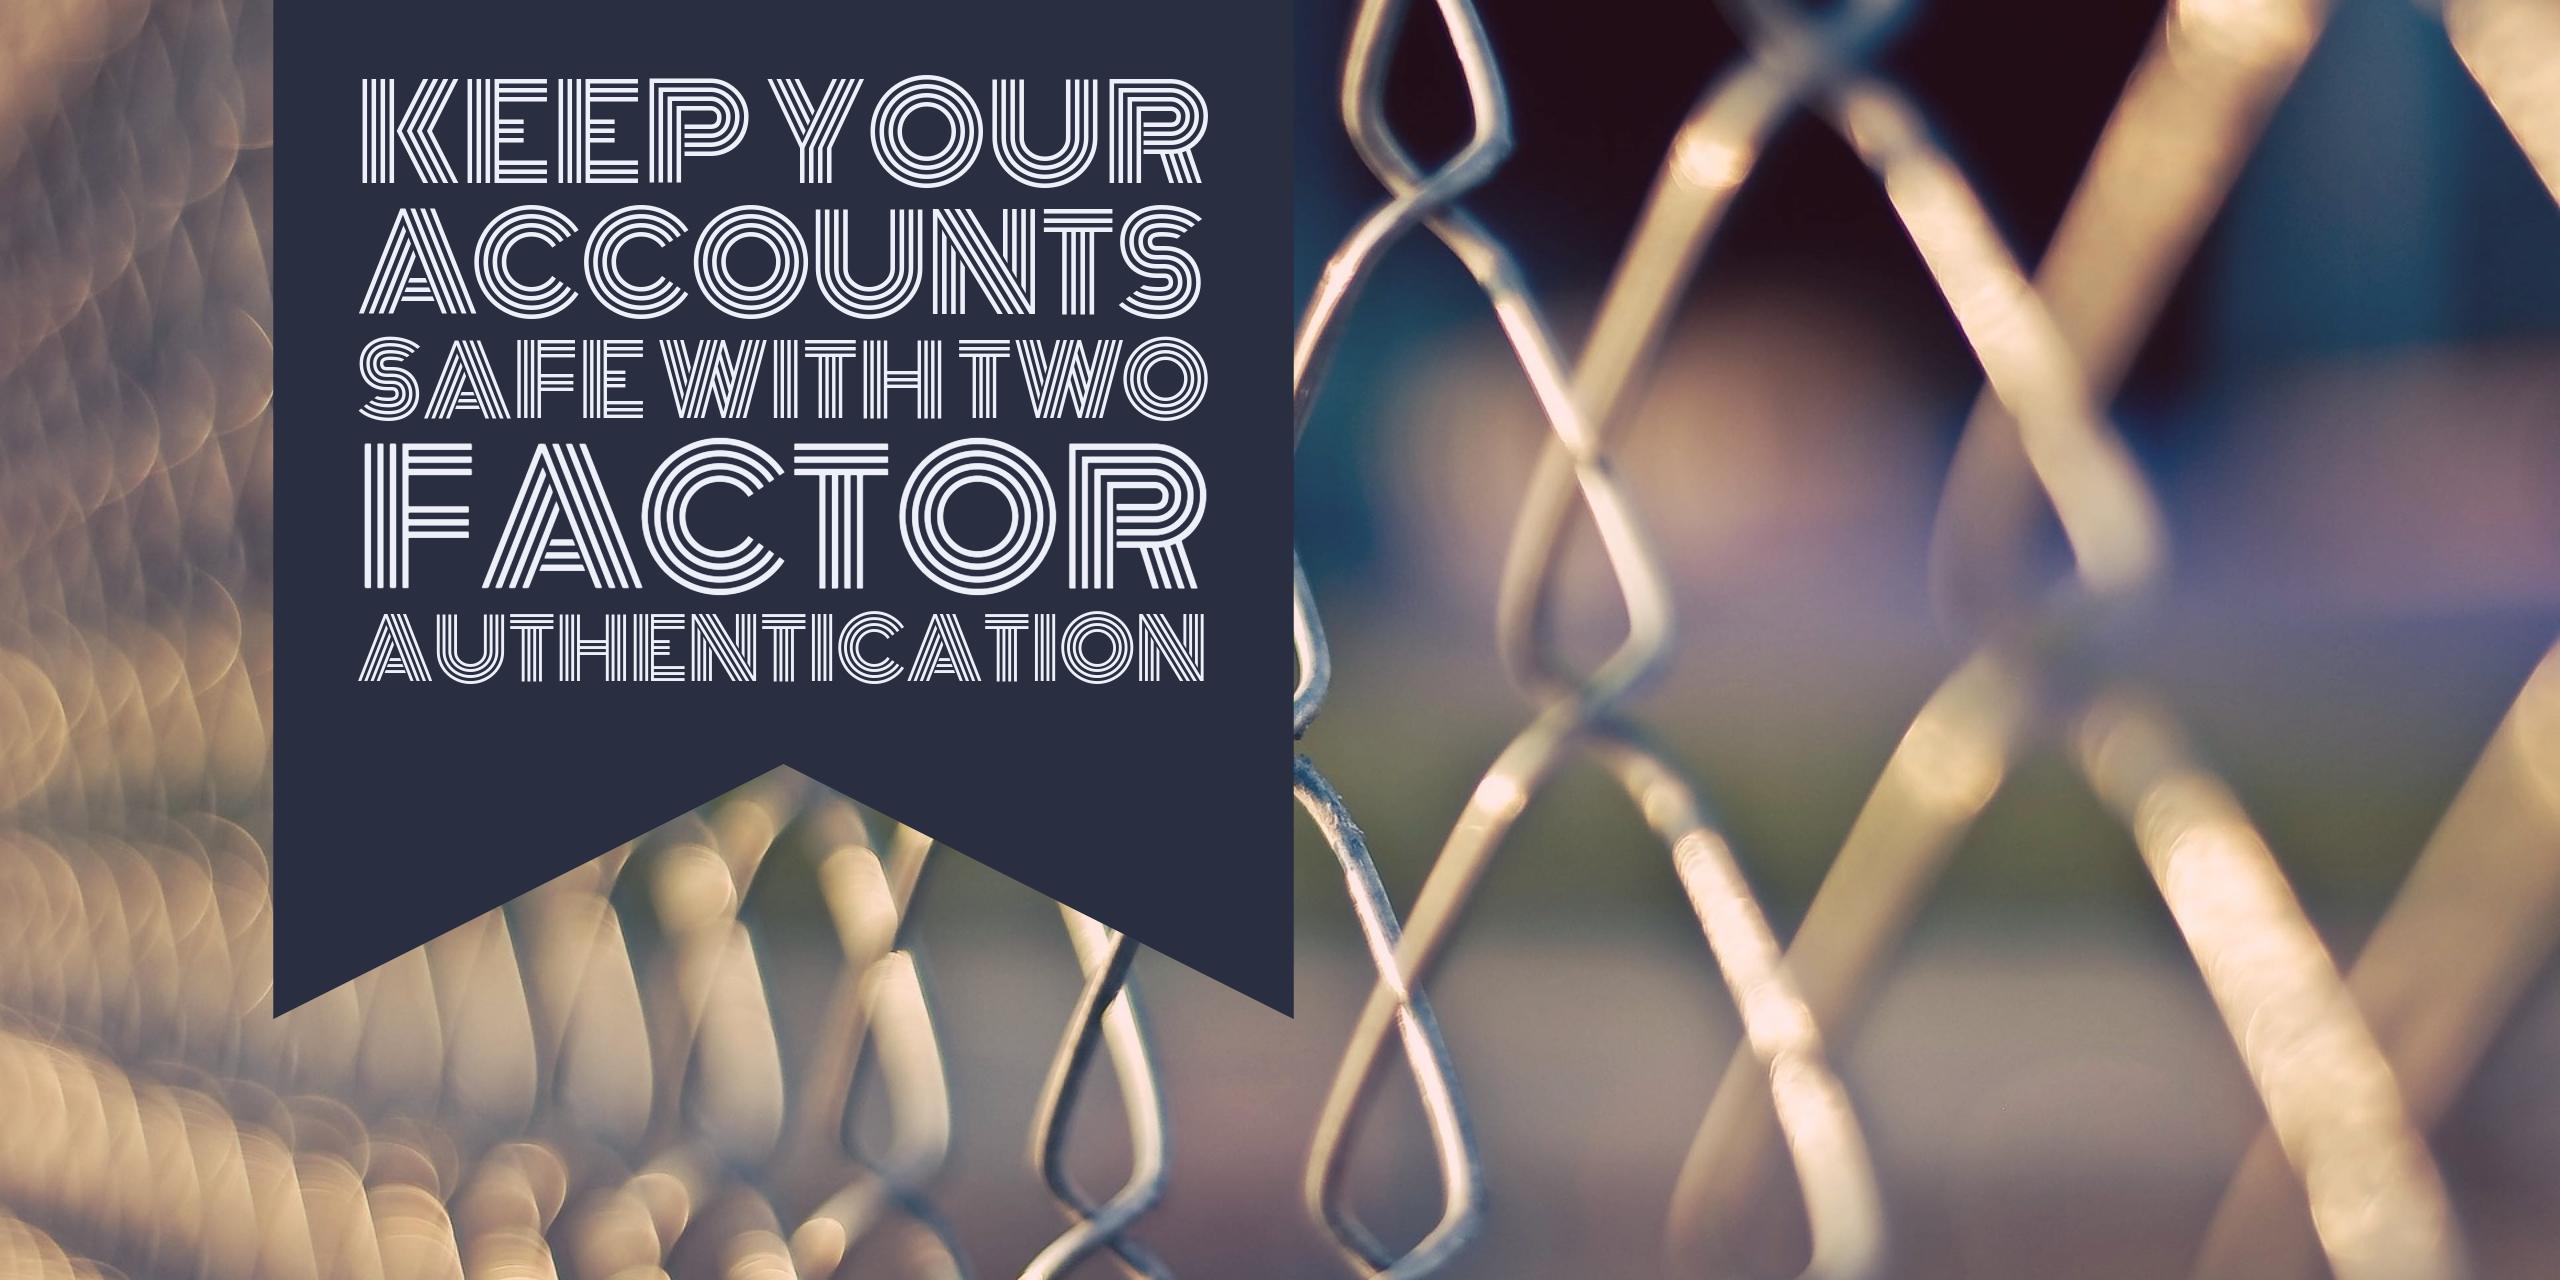 Keep your accounts safe with two factor authentication